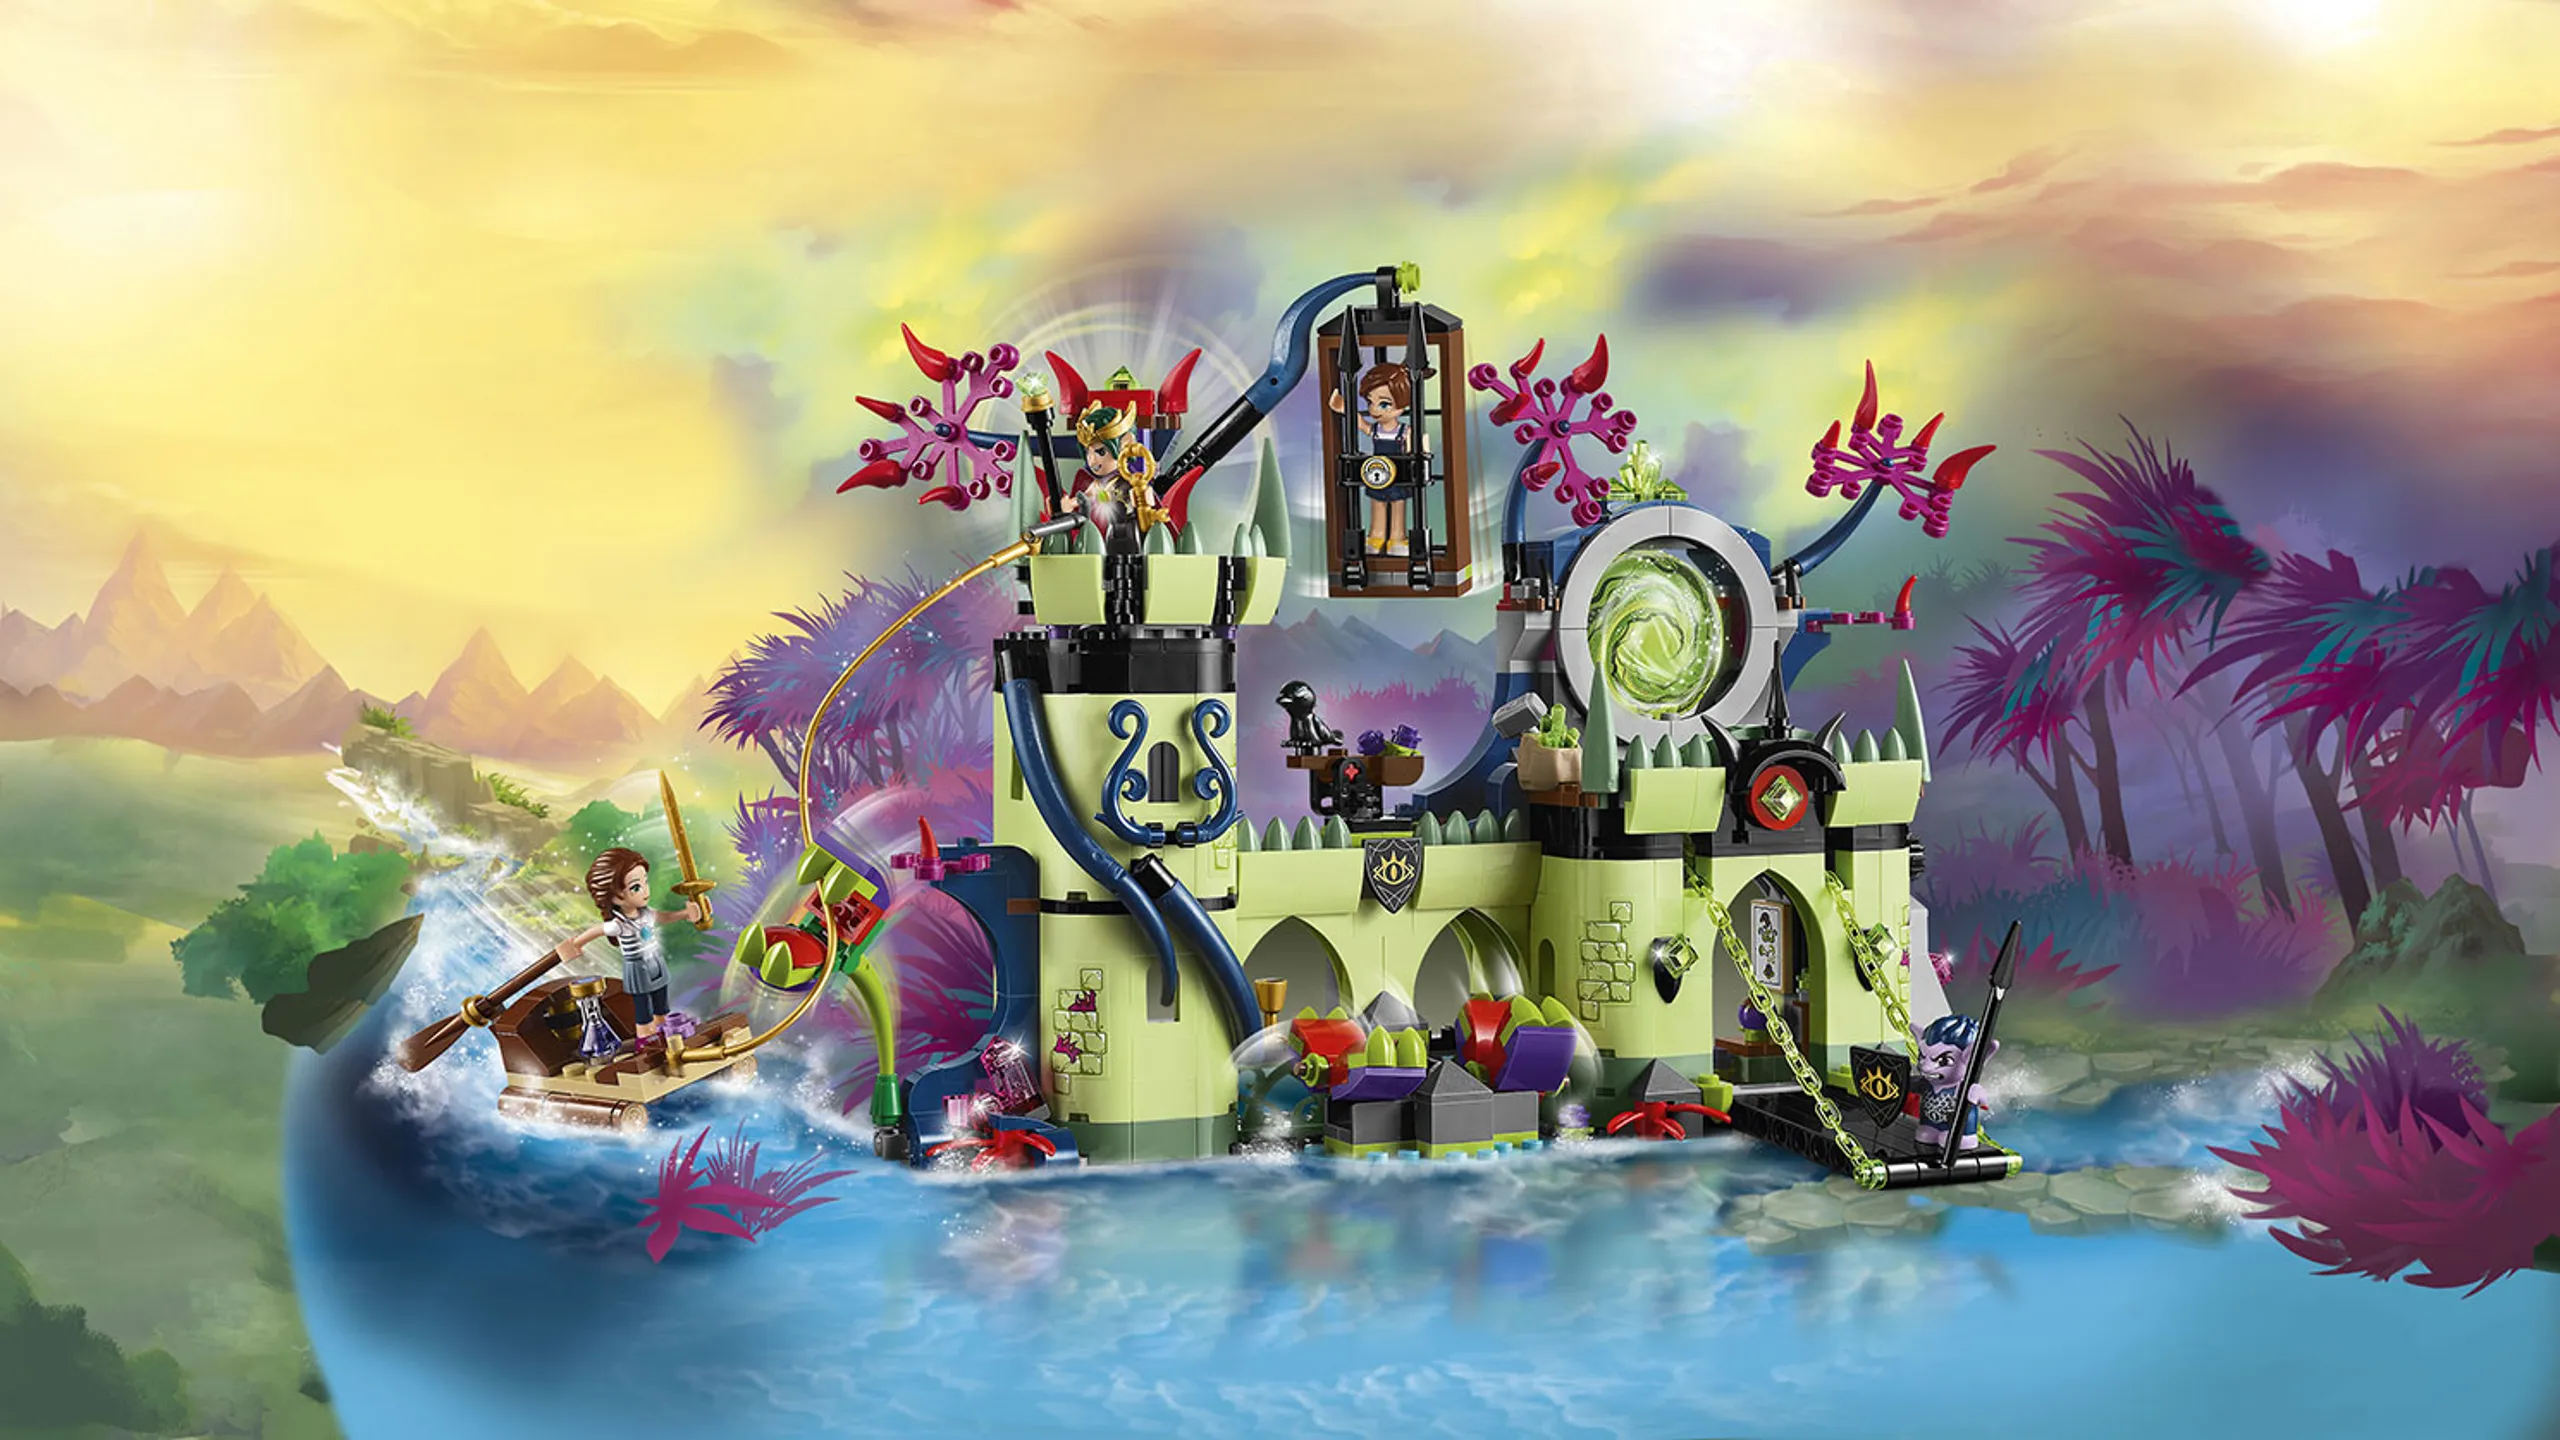 LEGO Elves - 41188 Breakout from the Goblin King's Fortress - Emily Jones tosses her grappling hook up on the fortress but a carnivorous plan stops her first attempt to rescue her little sister Sophie.